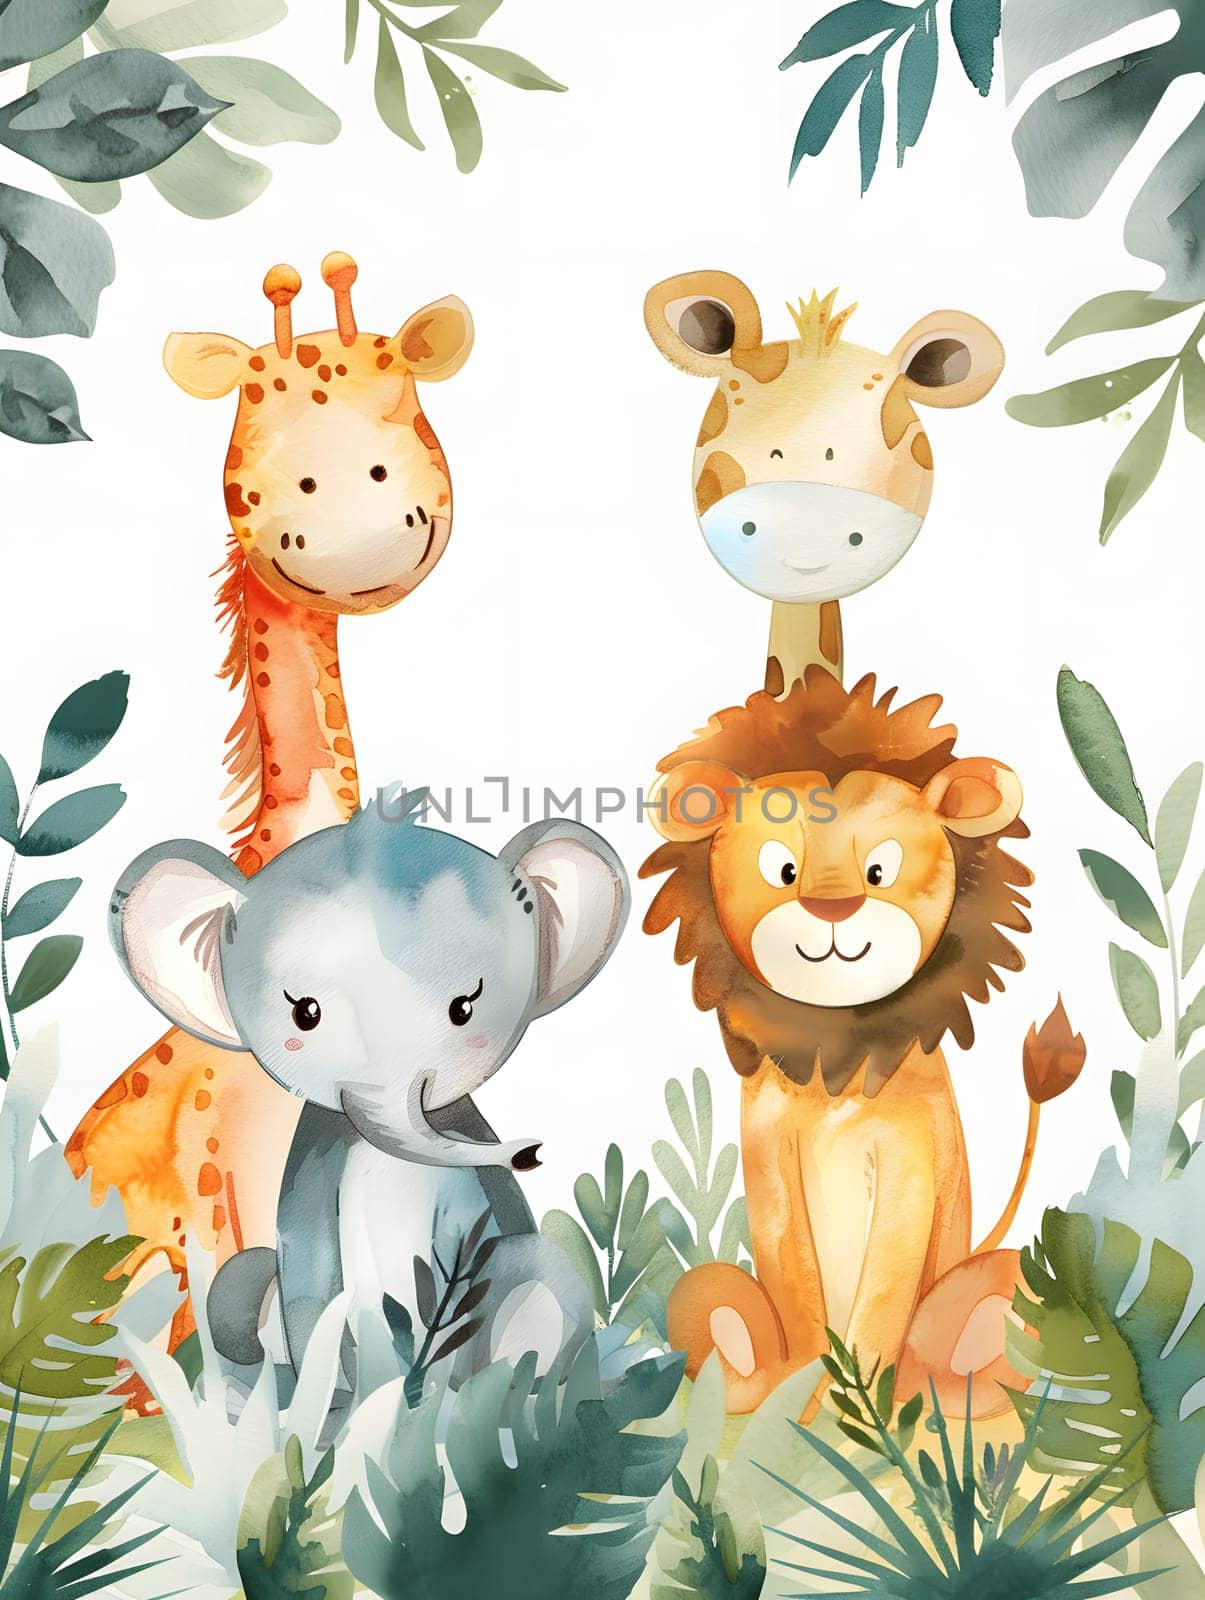 A giraffe, elephant, and lion, three happy vertebrate mammals, are chilling in the nature of the jungle, surrounded by green grass and tall plants